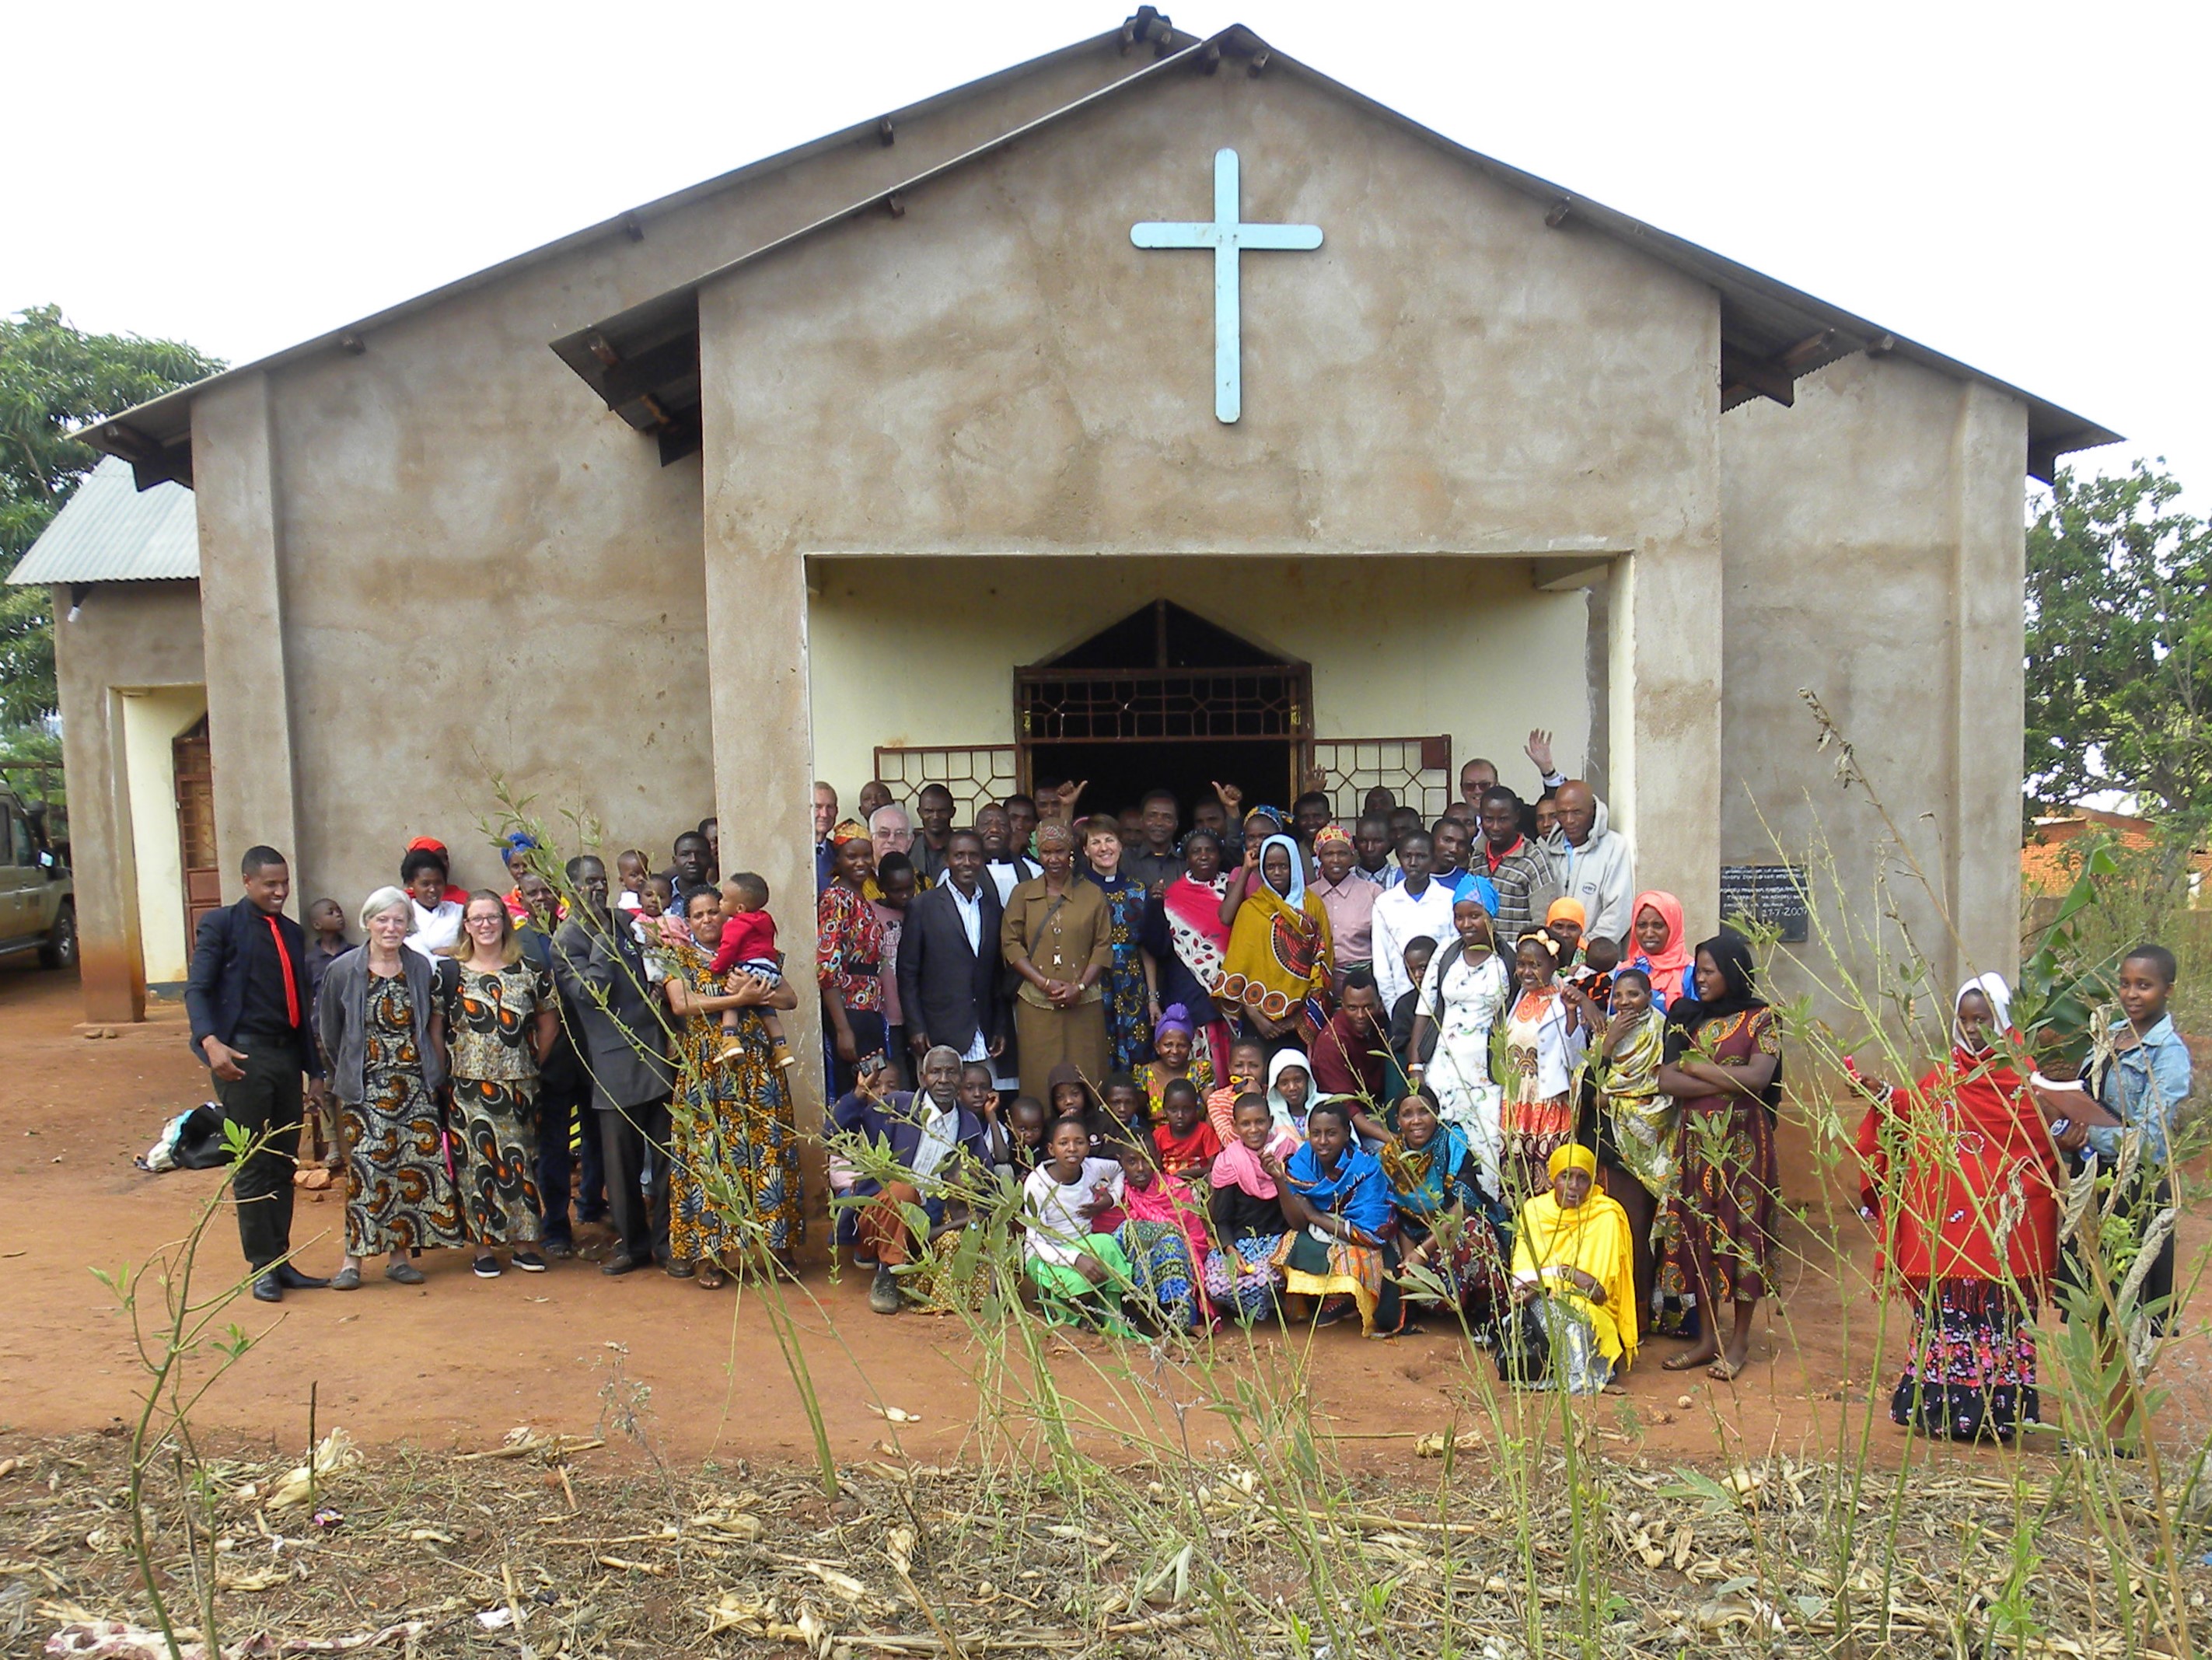 A congregation with visitors from Paddock Wood gather outside a church in Bereko